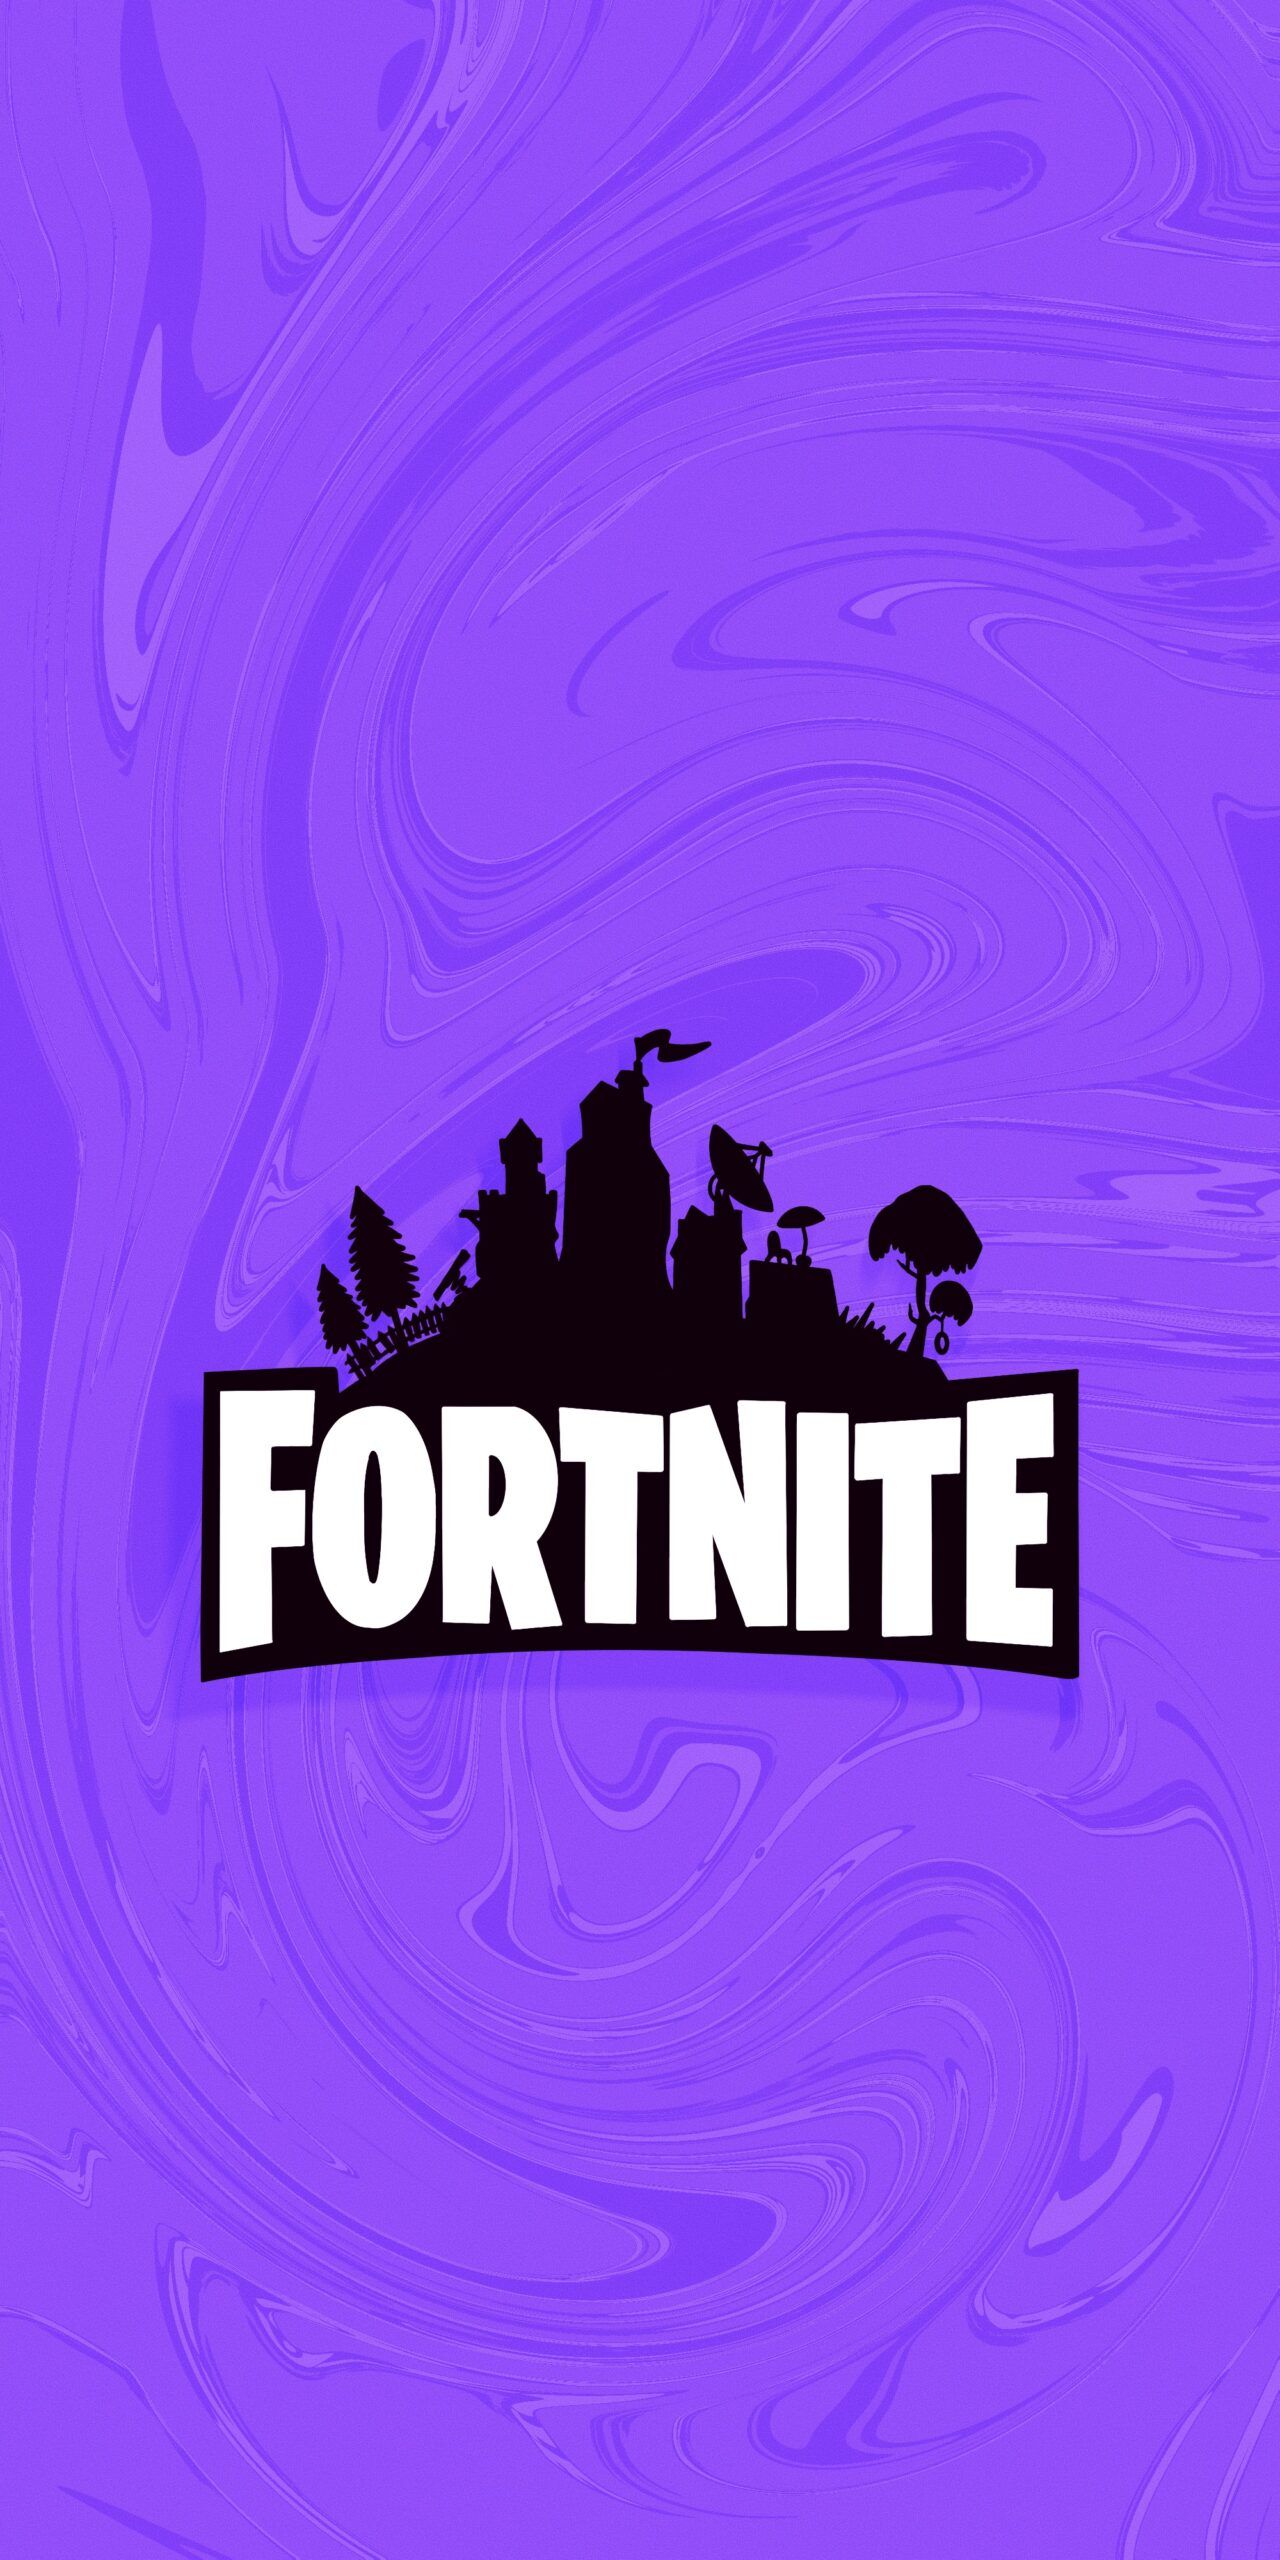 Fortnite wallpaper with the game logo on a purple background - Fortnite